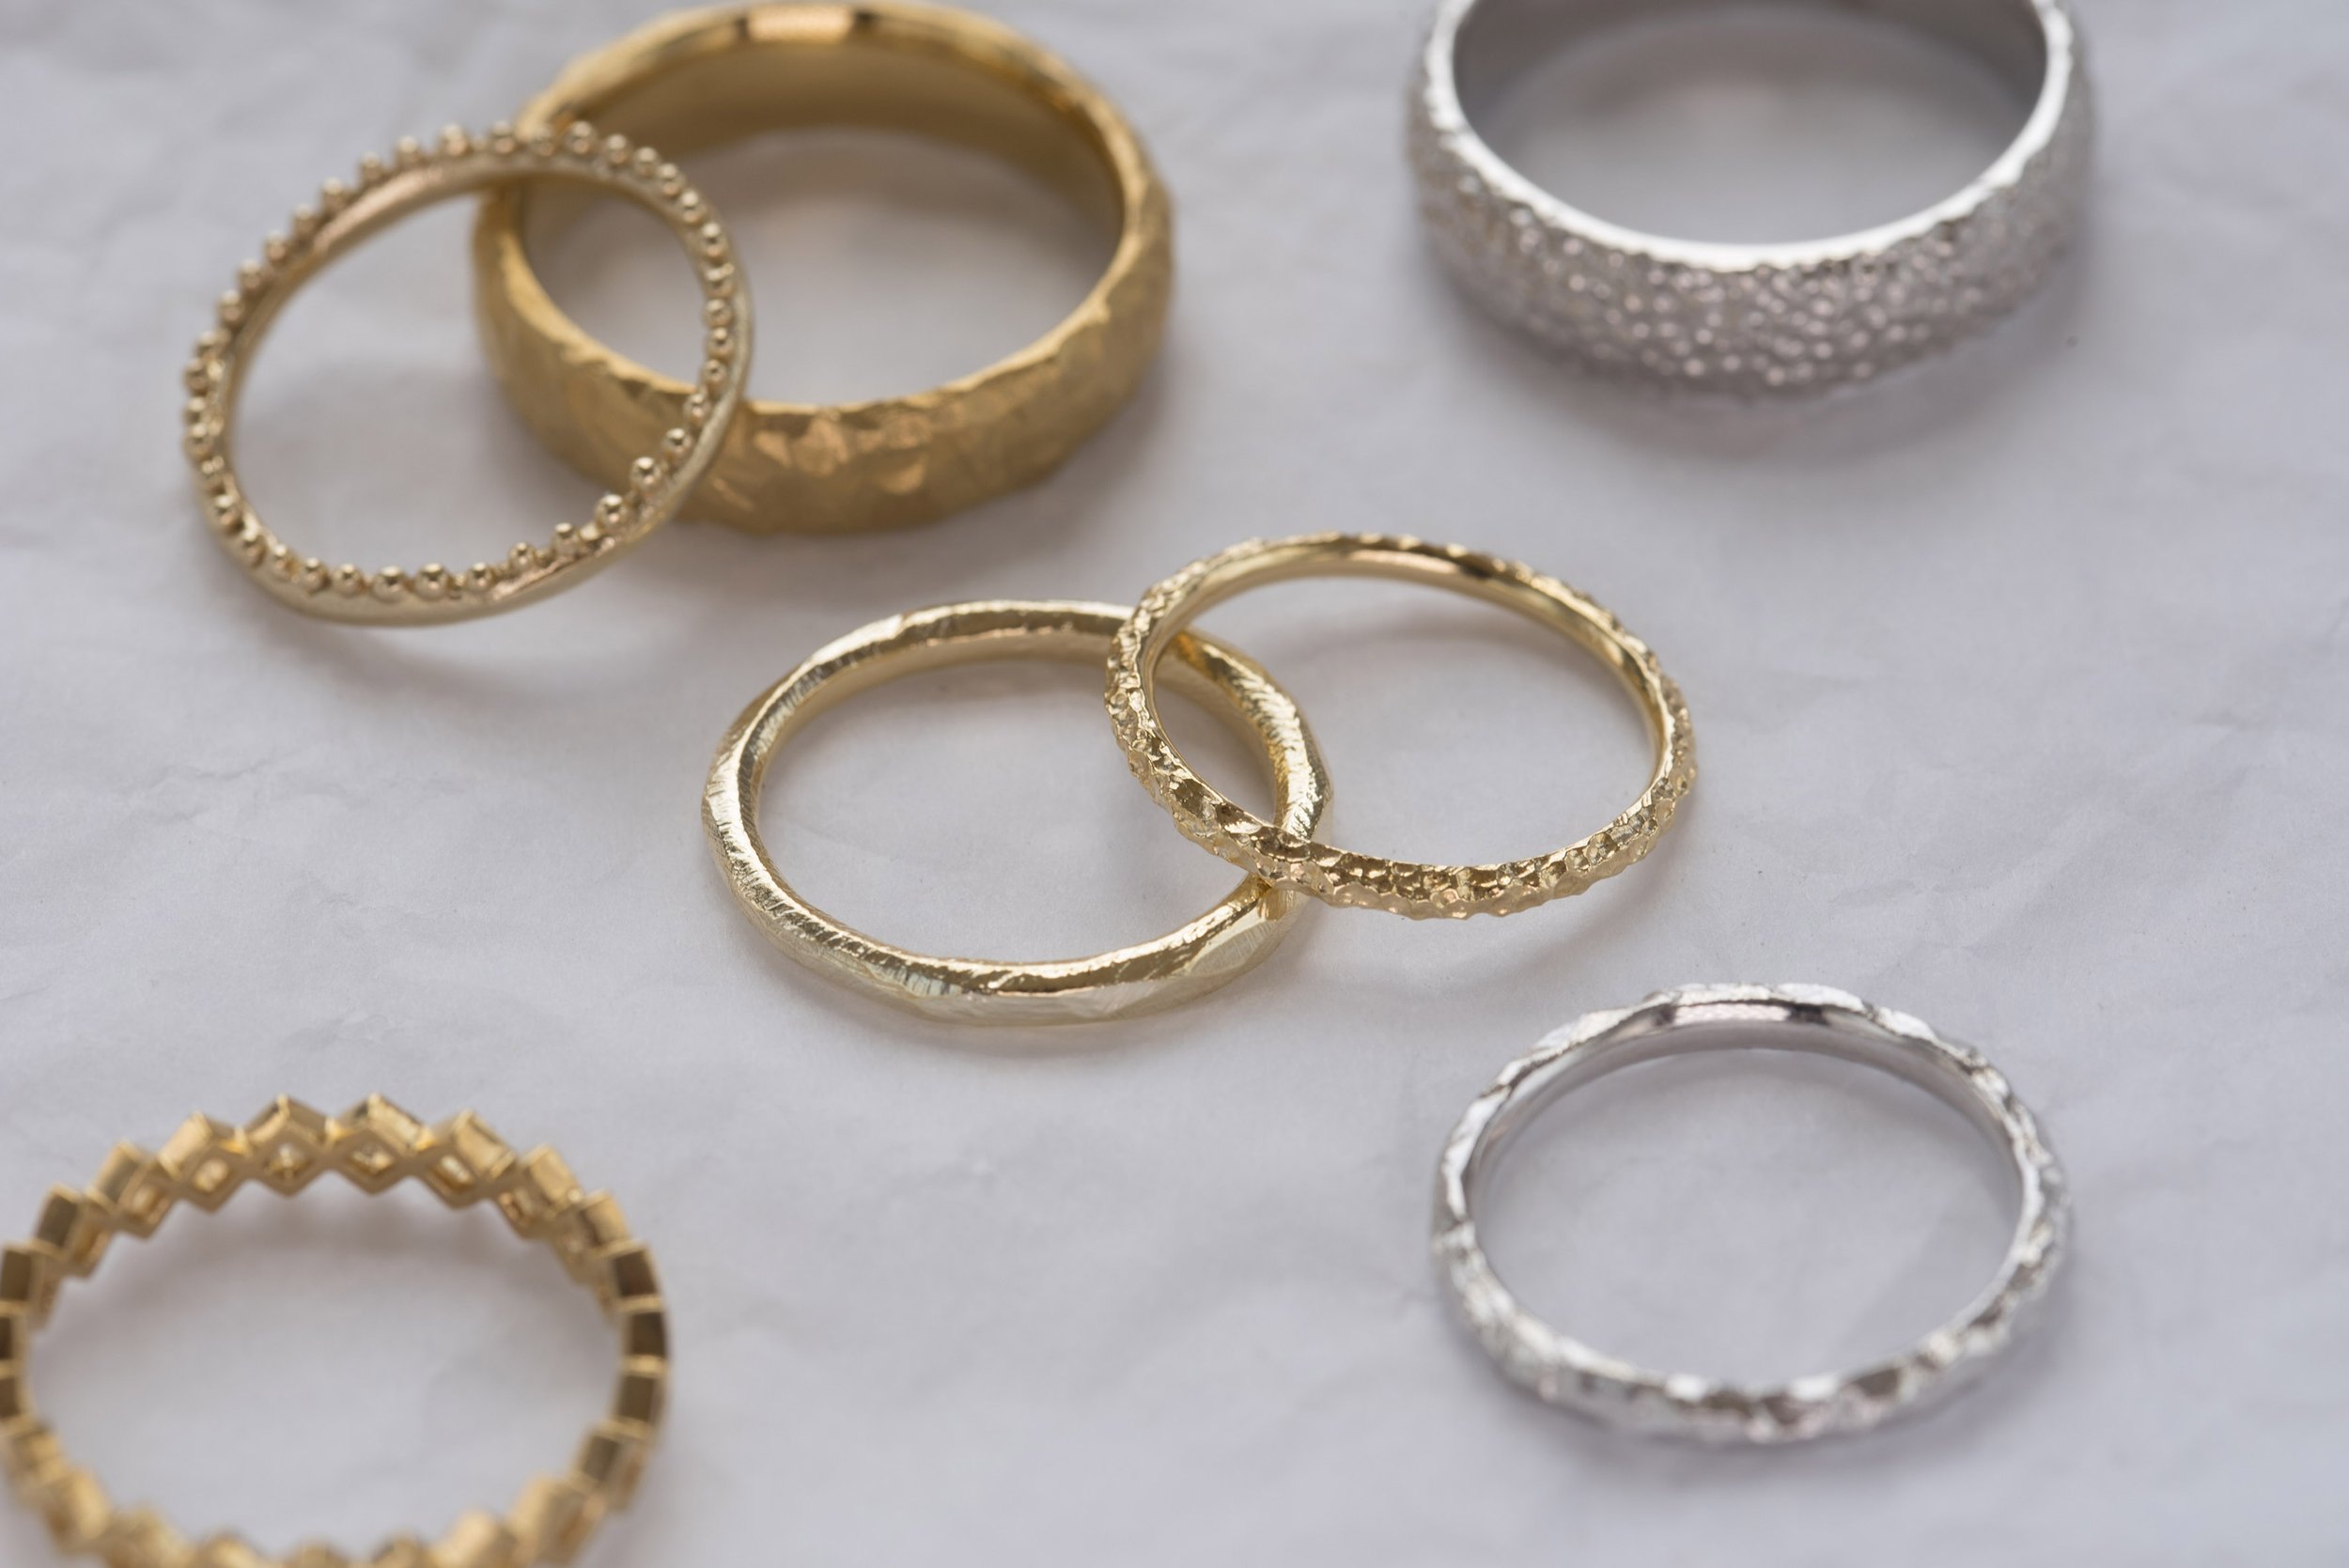  Various gold and silver wedding bands displayed in different thickness’, widths and textures. 